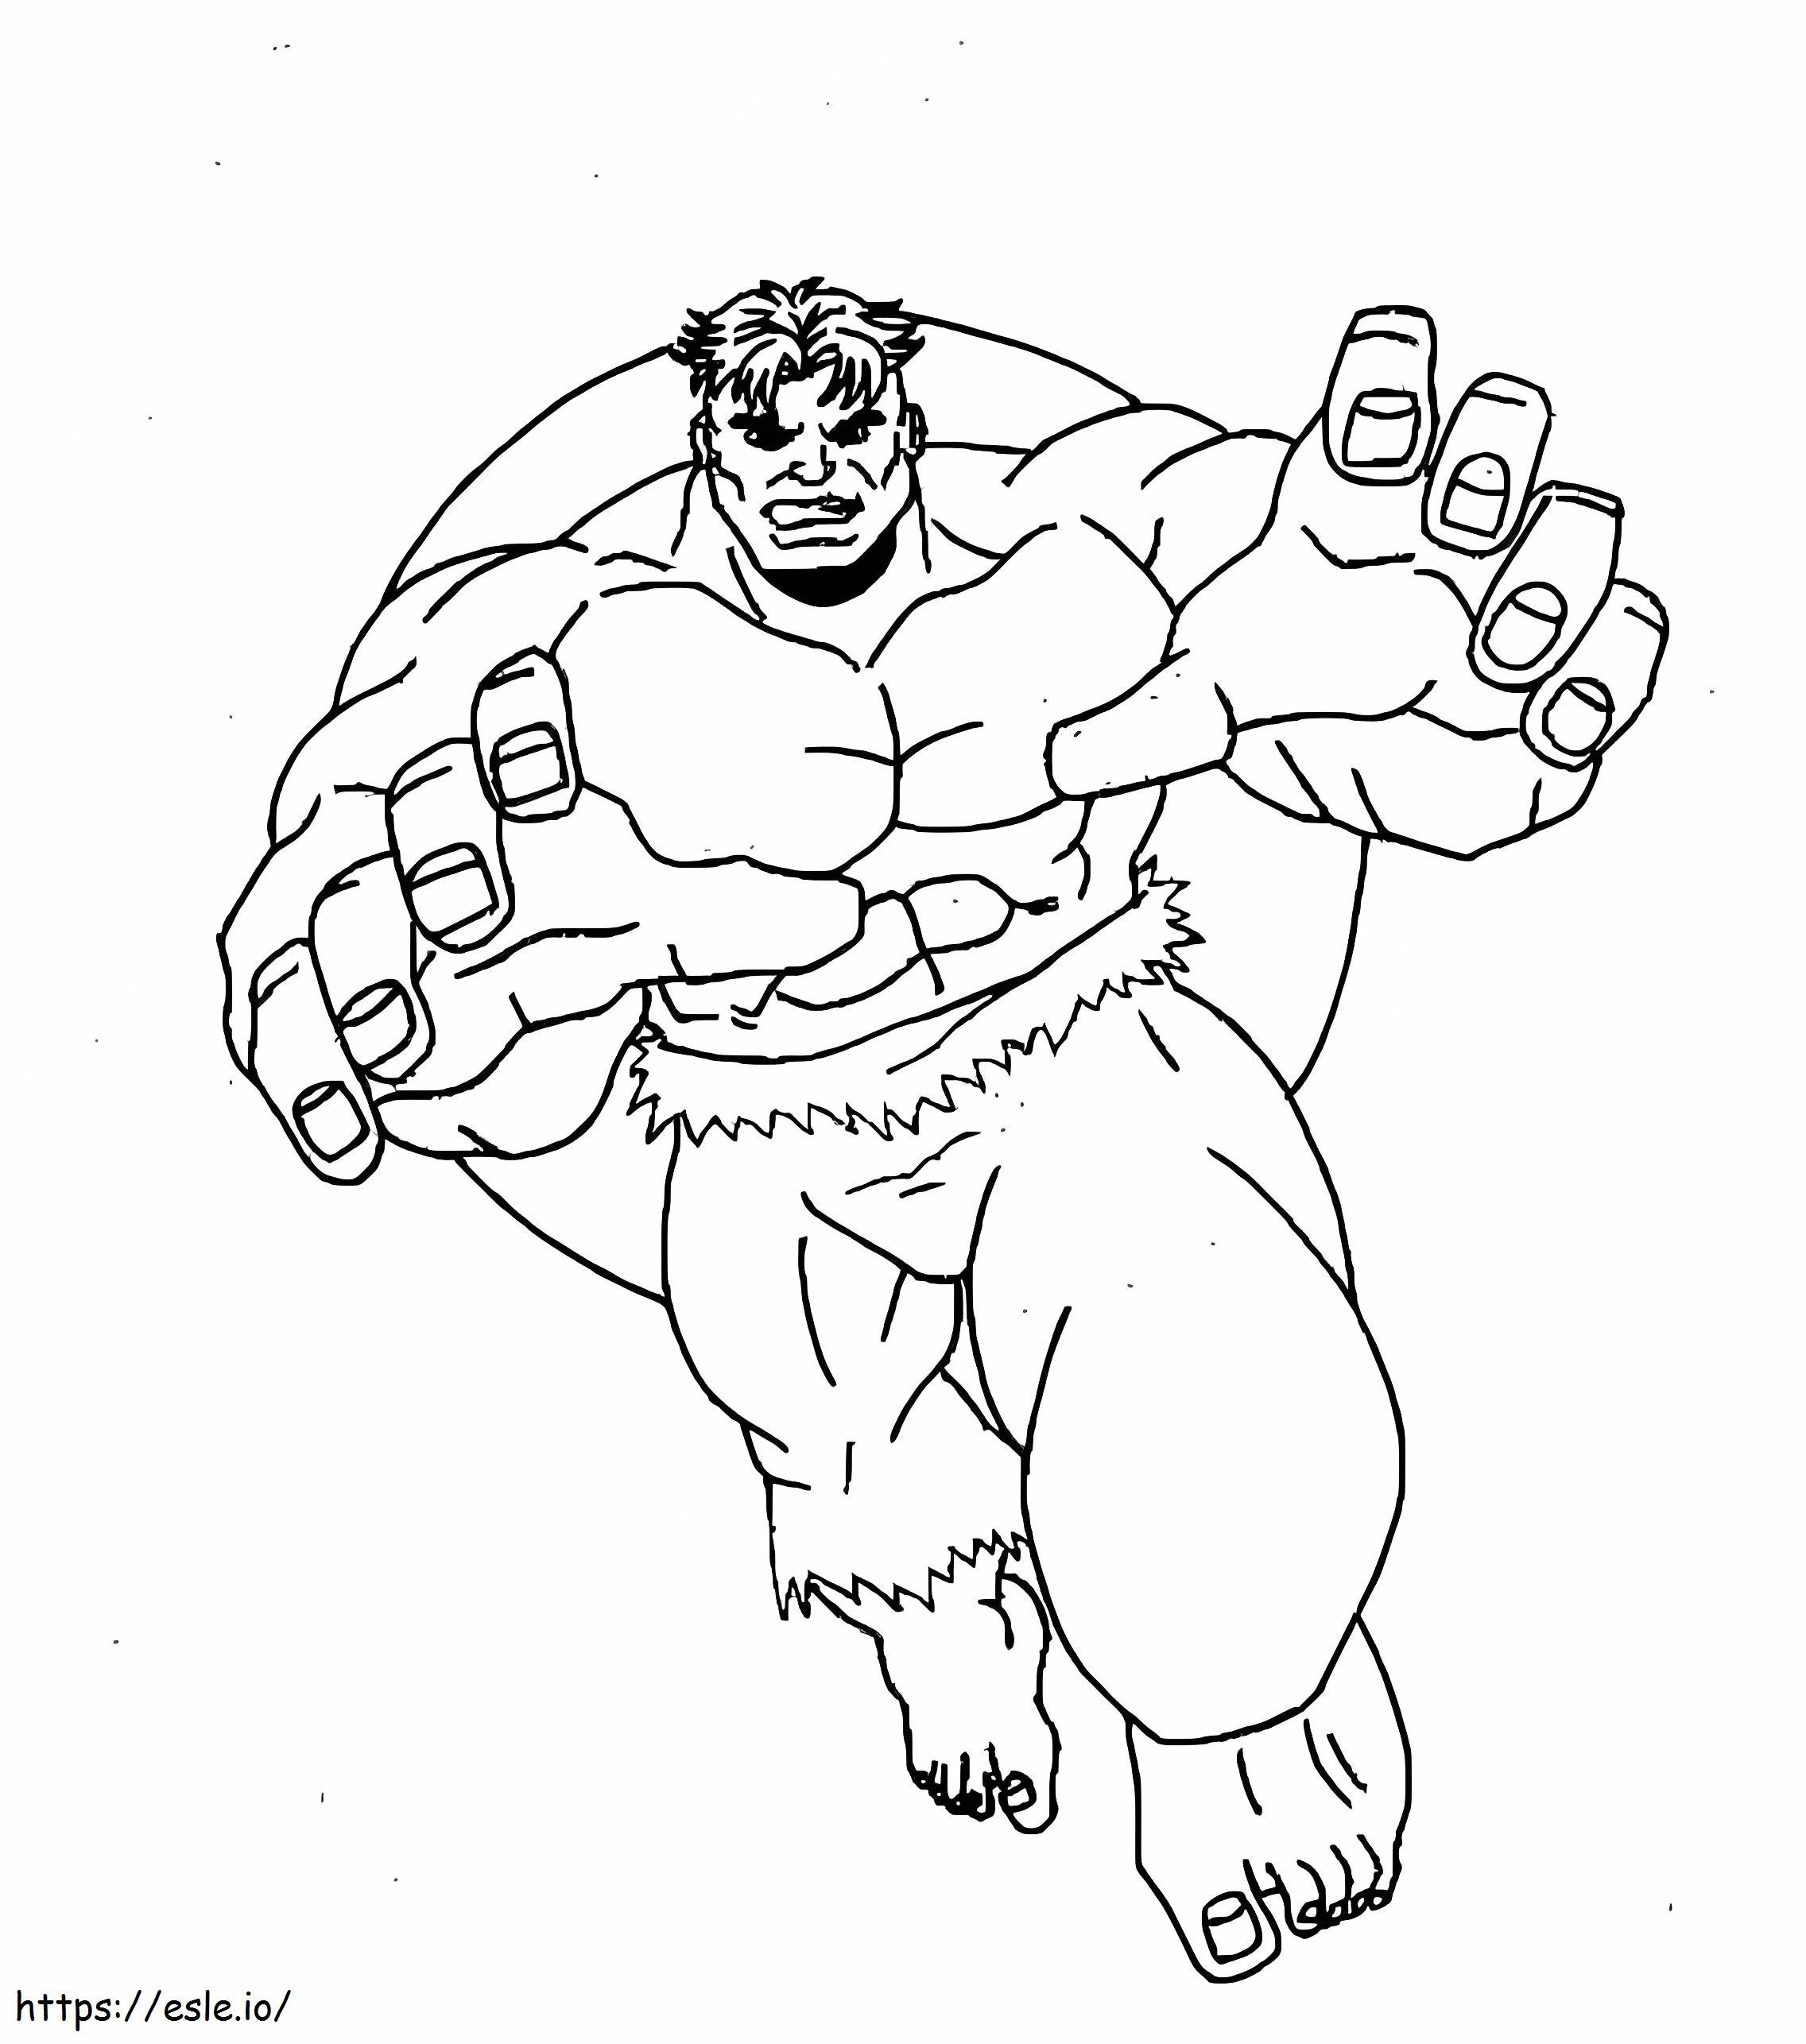 Hulk Is Running coloring page